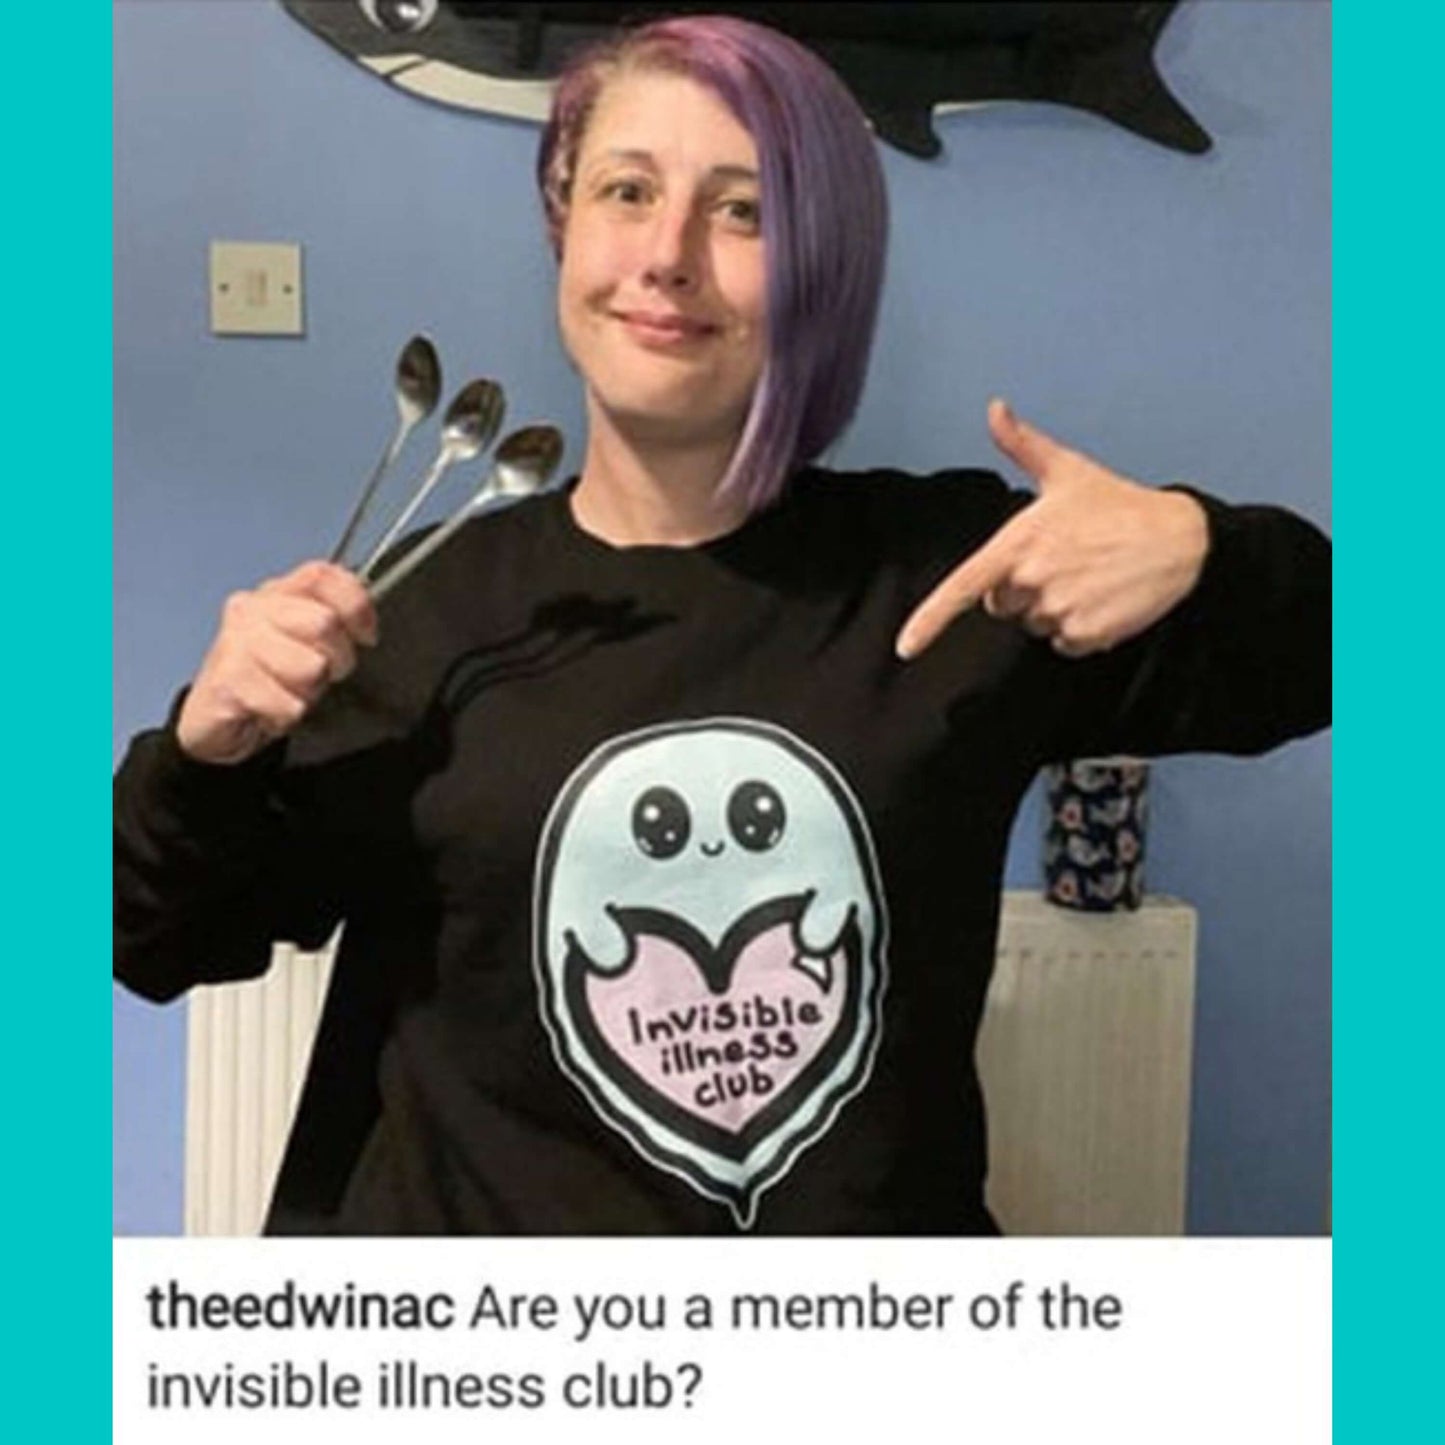 The Invisible Illness Club Sweatshirt Jumper being modelled by @theedwinac in front of a purple wall, she has a purple asymmetric bob and is smiling pointing down at the jumper and holding up 3 spoons. The black sweater features a smiling pastel blue ghost with big sparkly eyes holding up a pastel pink heart with black text reading 'invisible illness club'. The hand drawn design is raising awareness for hidden disabilities.